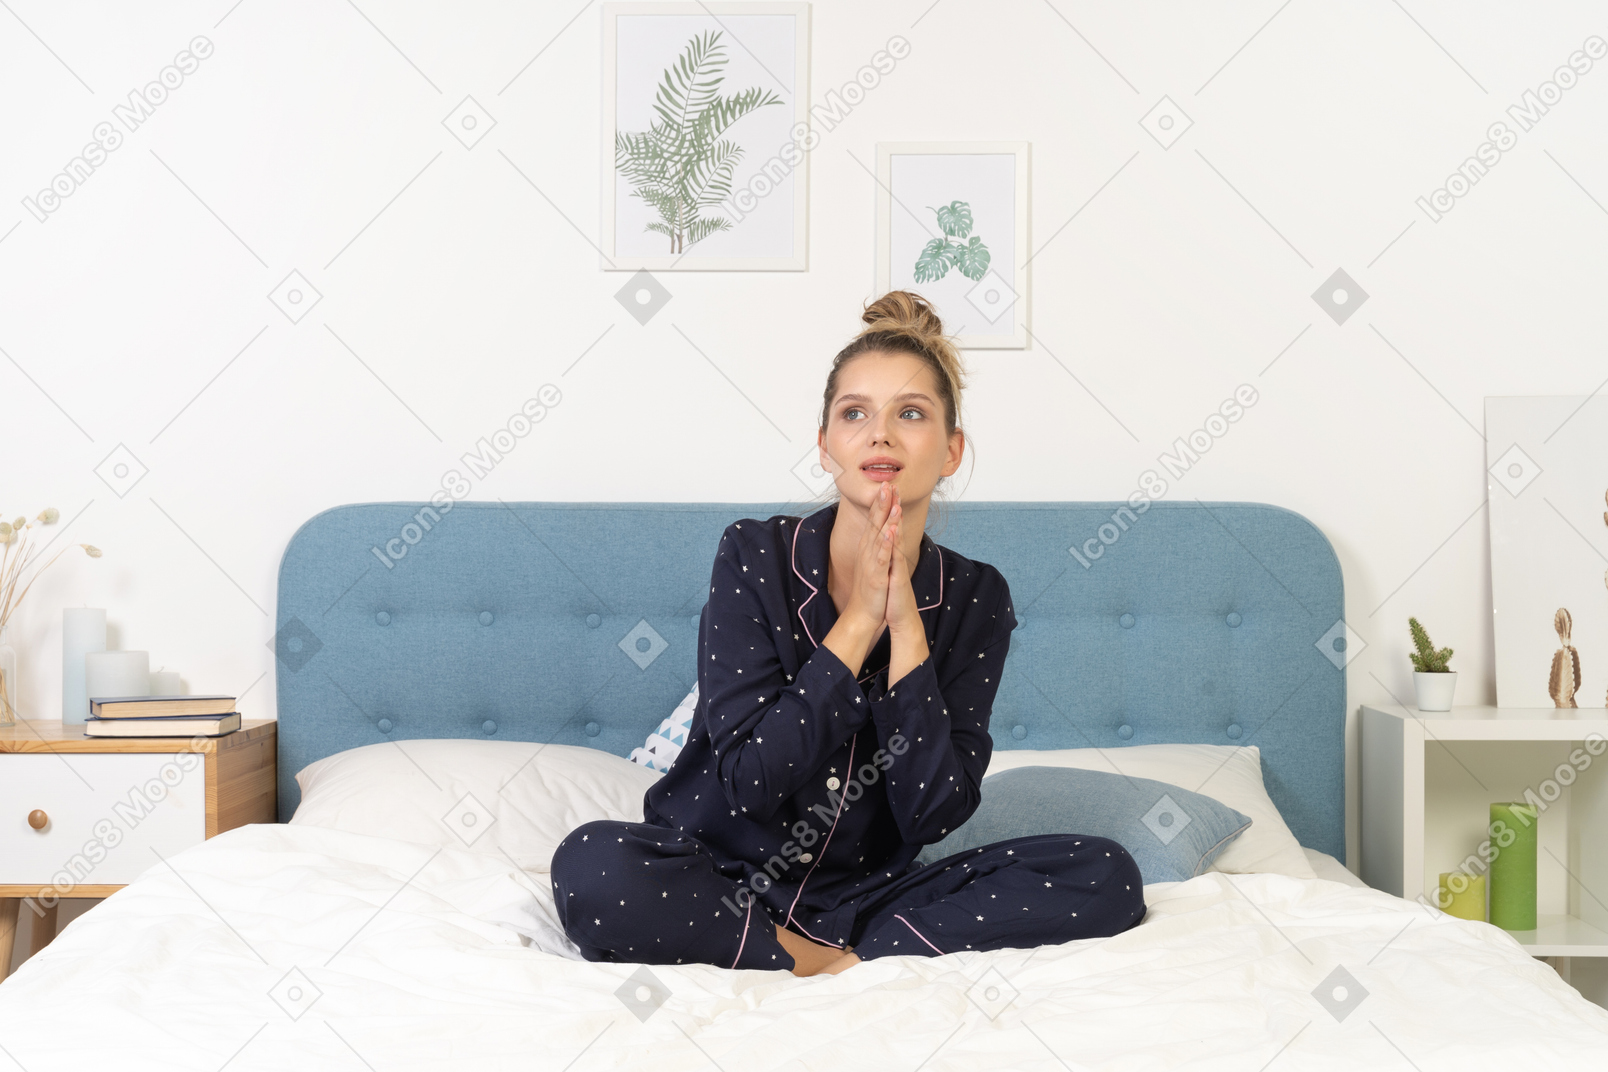 Front view of a young woman in pajamas staying in bed and holding hands together